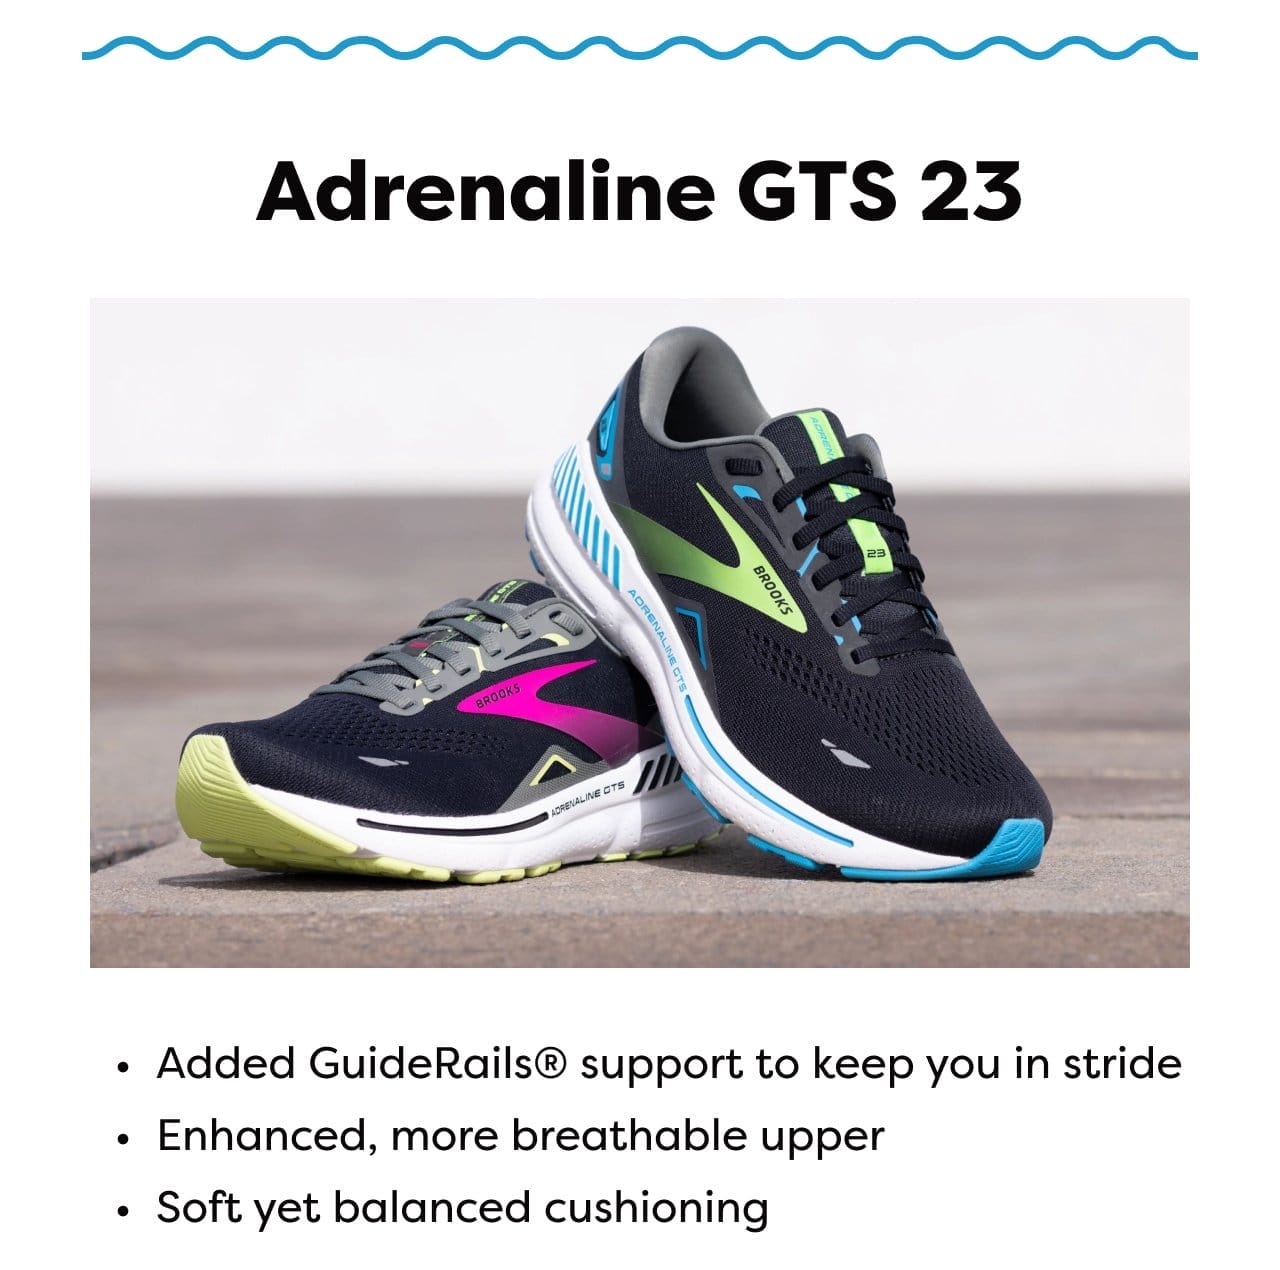 Adrenaline GTS 23 - Added GuideRails® support to keep you in stride - Enhanced, yet more breathable upper - Soft yet balanced cusioning